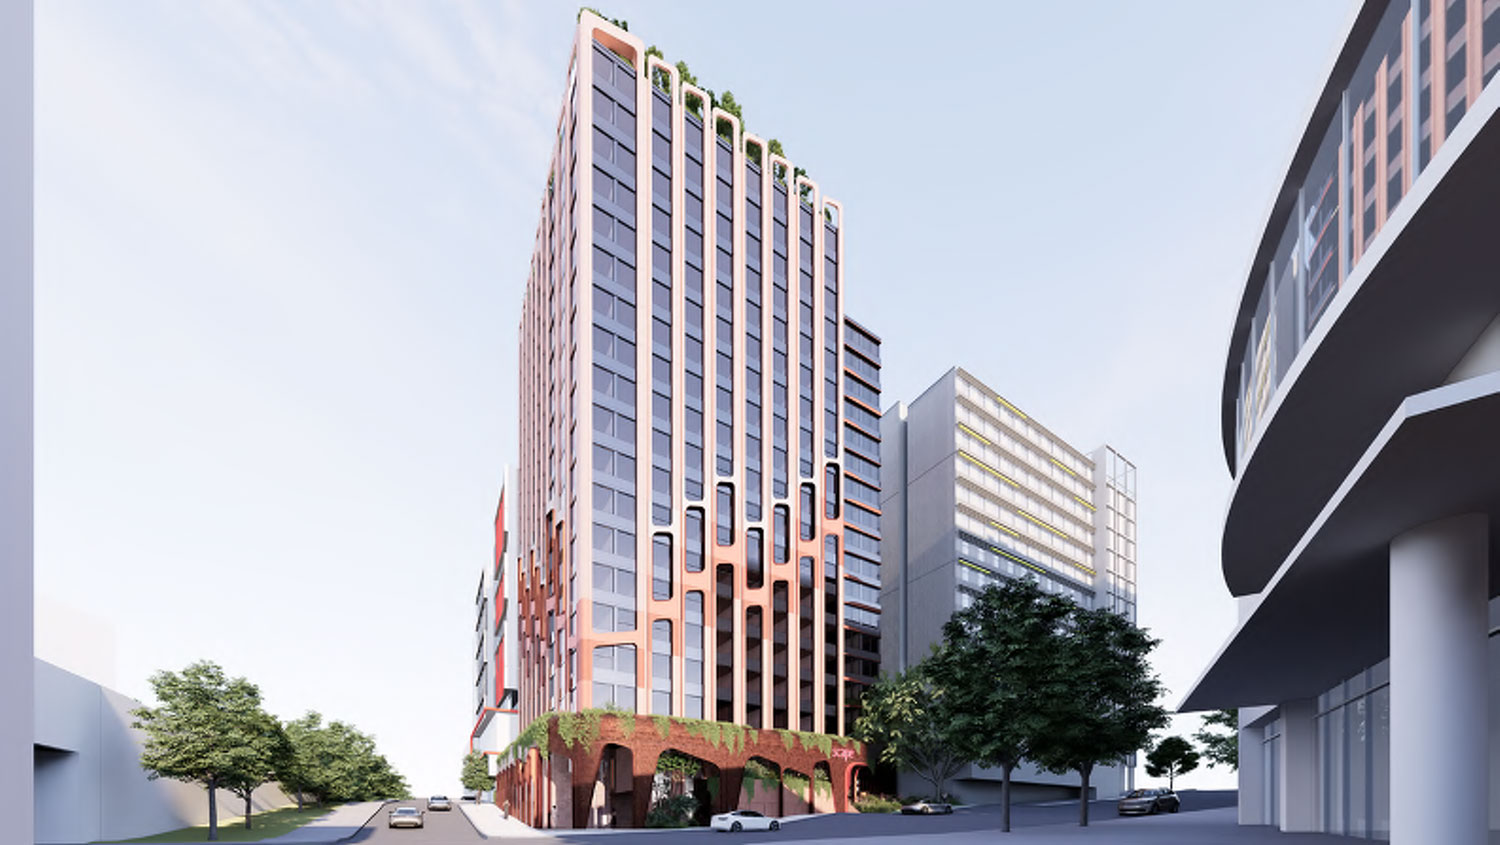 Architectural rendering of the new Scape development located at 41 Tribune St, South Brisbane